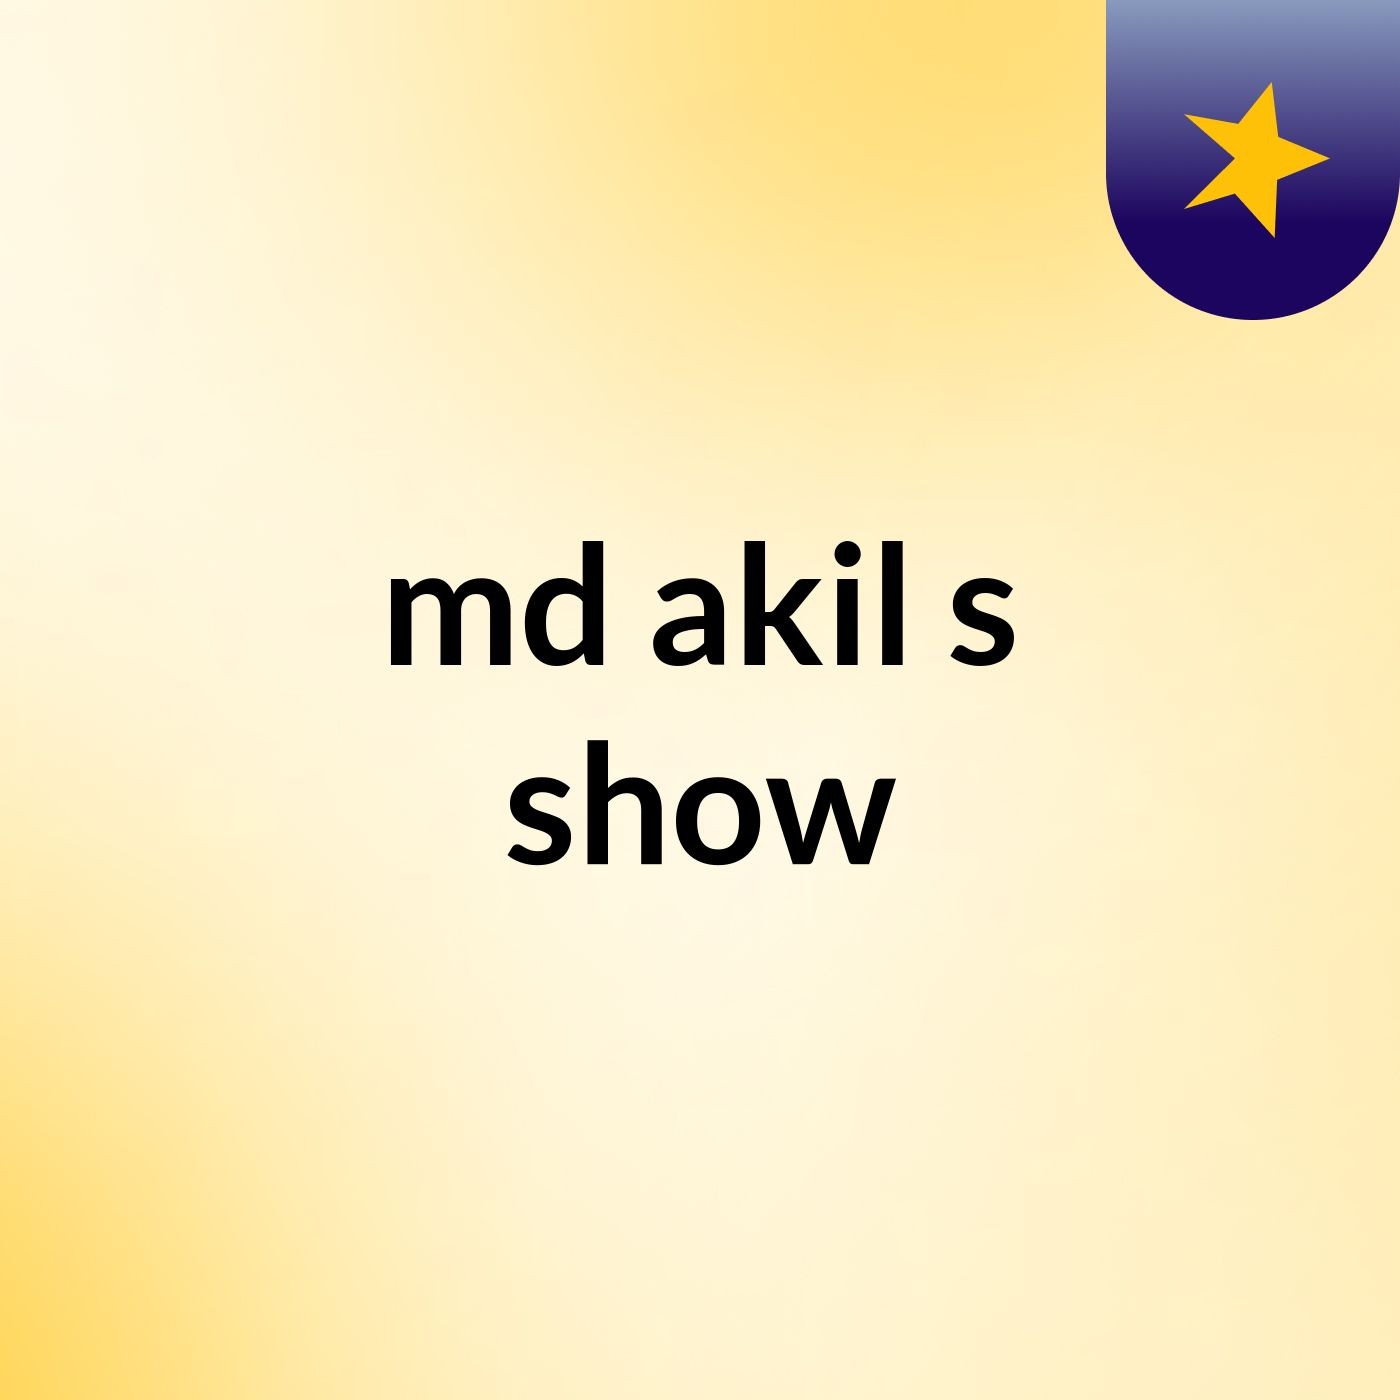 md akil's show